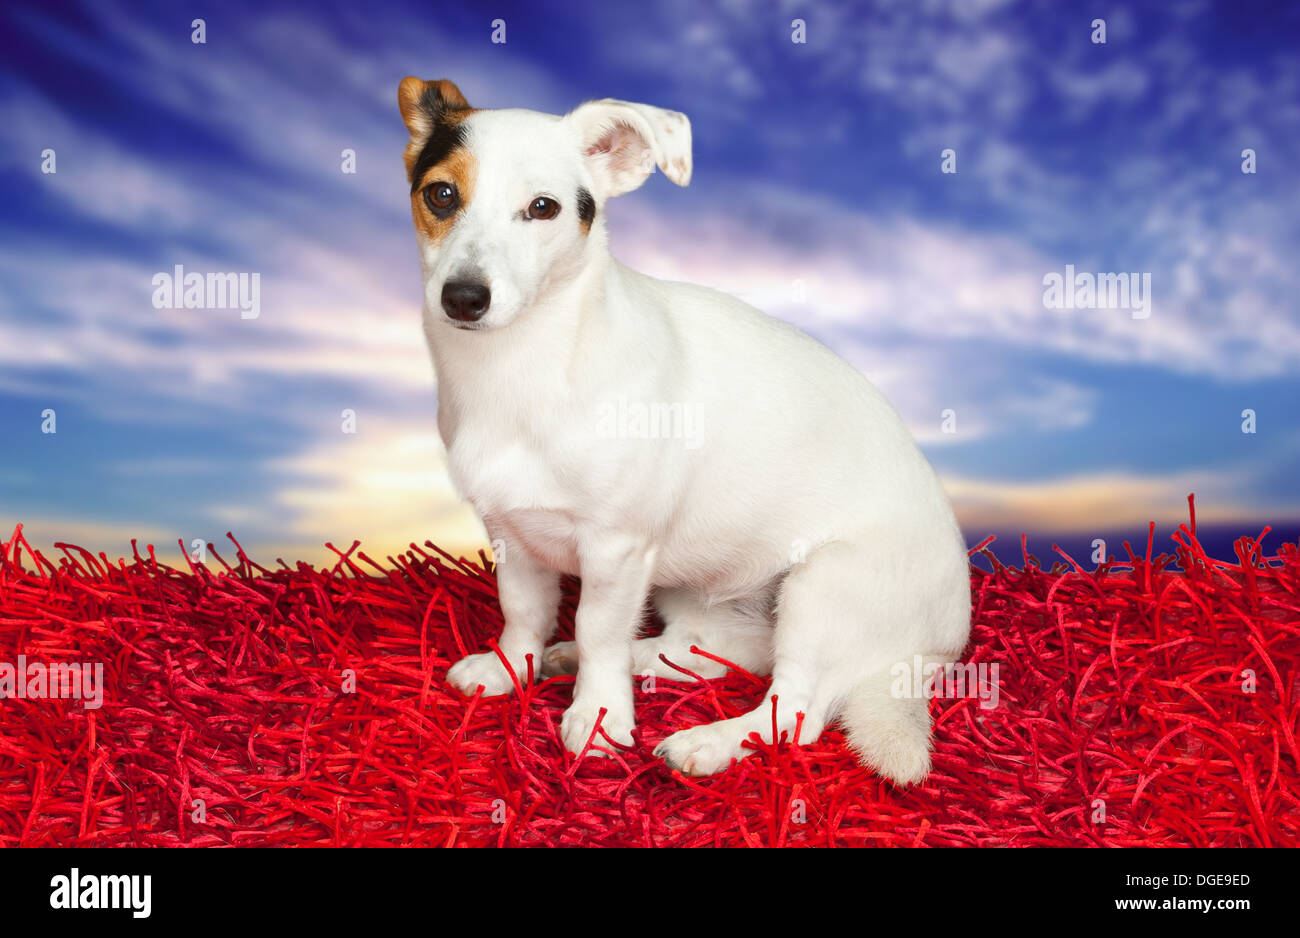 Jack russell terrier on a red carpet on sky with clouds Stock Photo